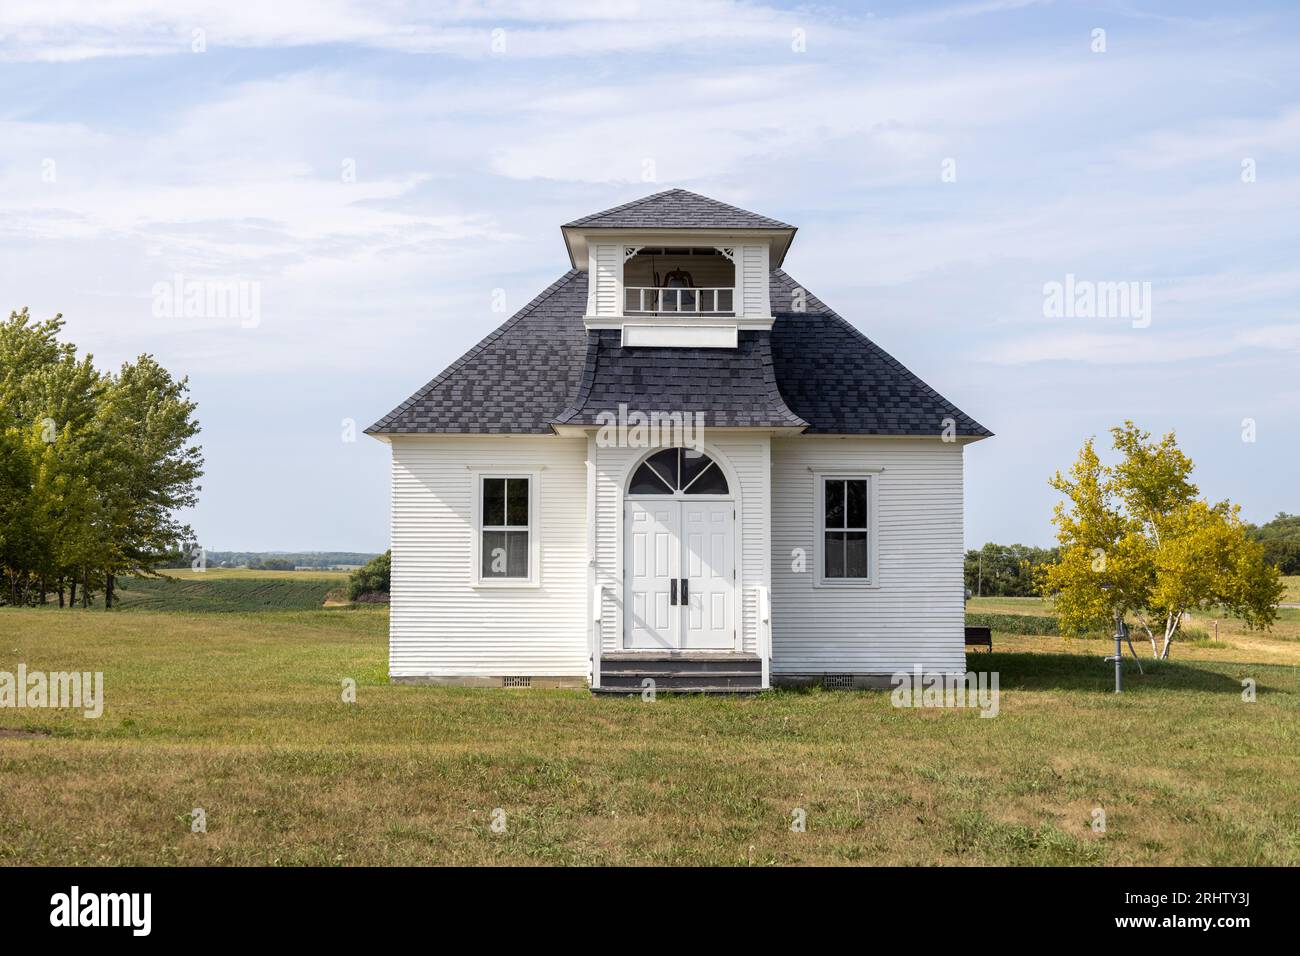 Sunny landscape view of a rural 19th century wood constructed one-room country schoolhouse situated on a prairie in midwest USA. Stock Photo